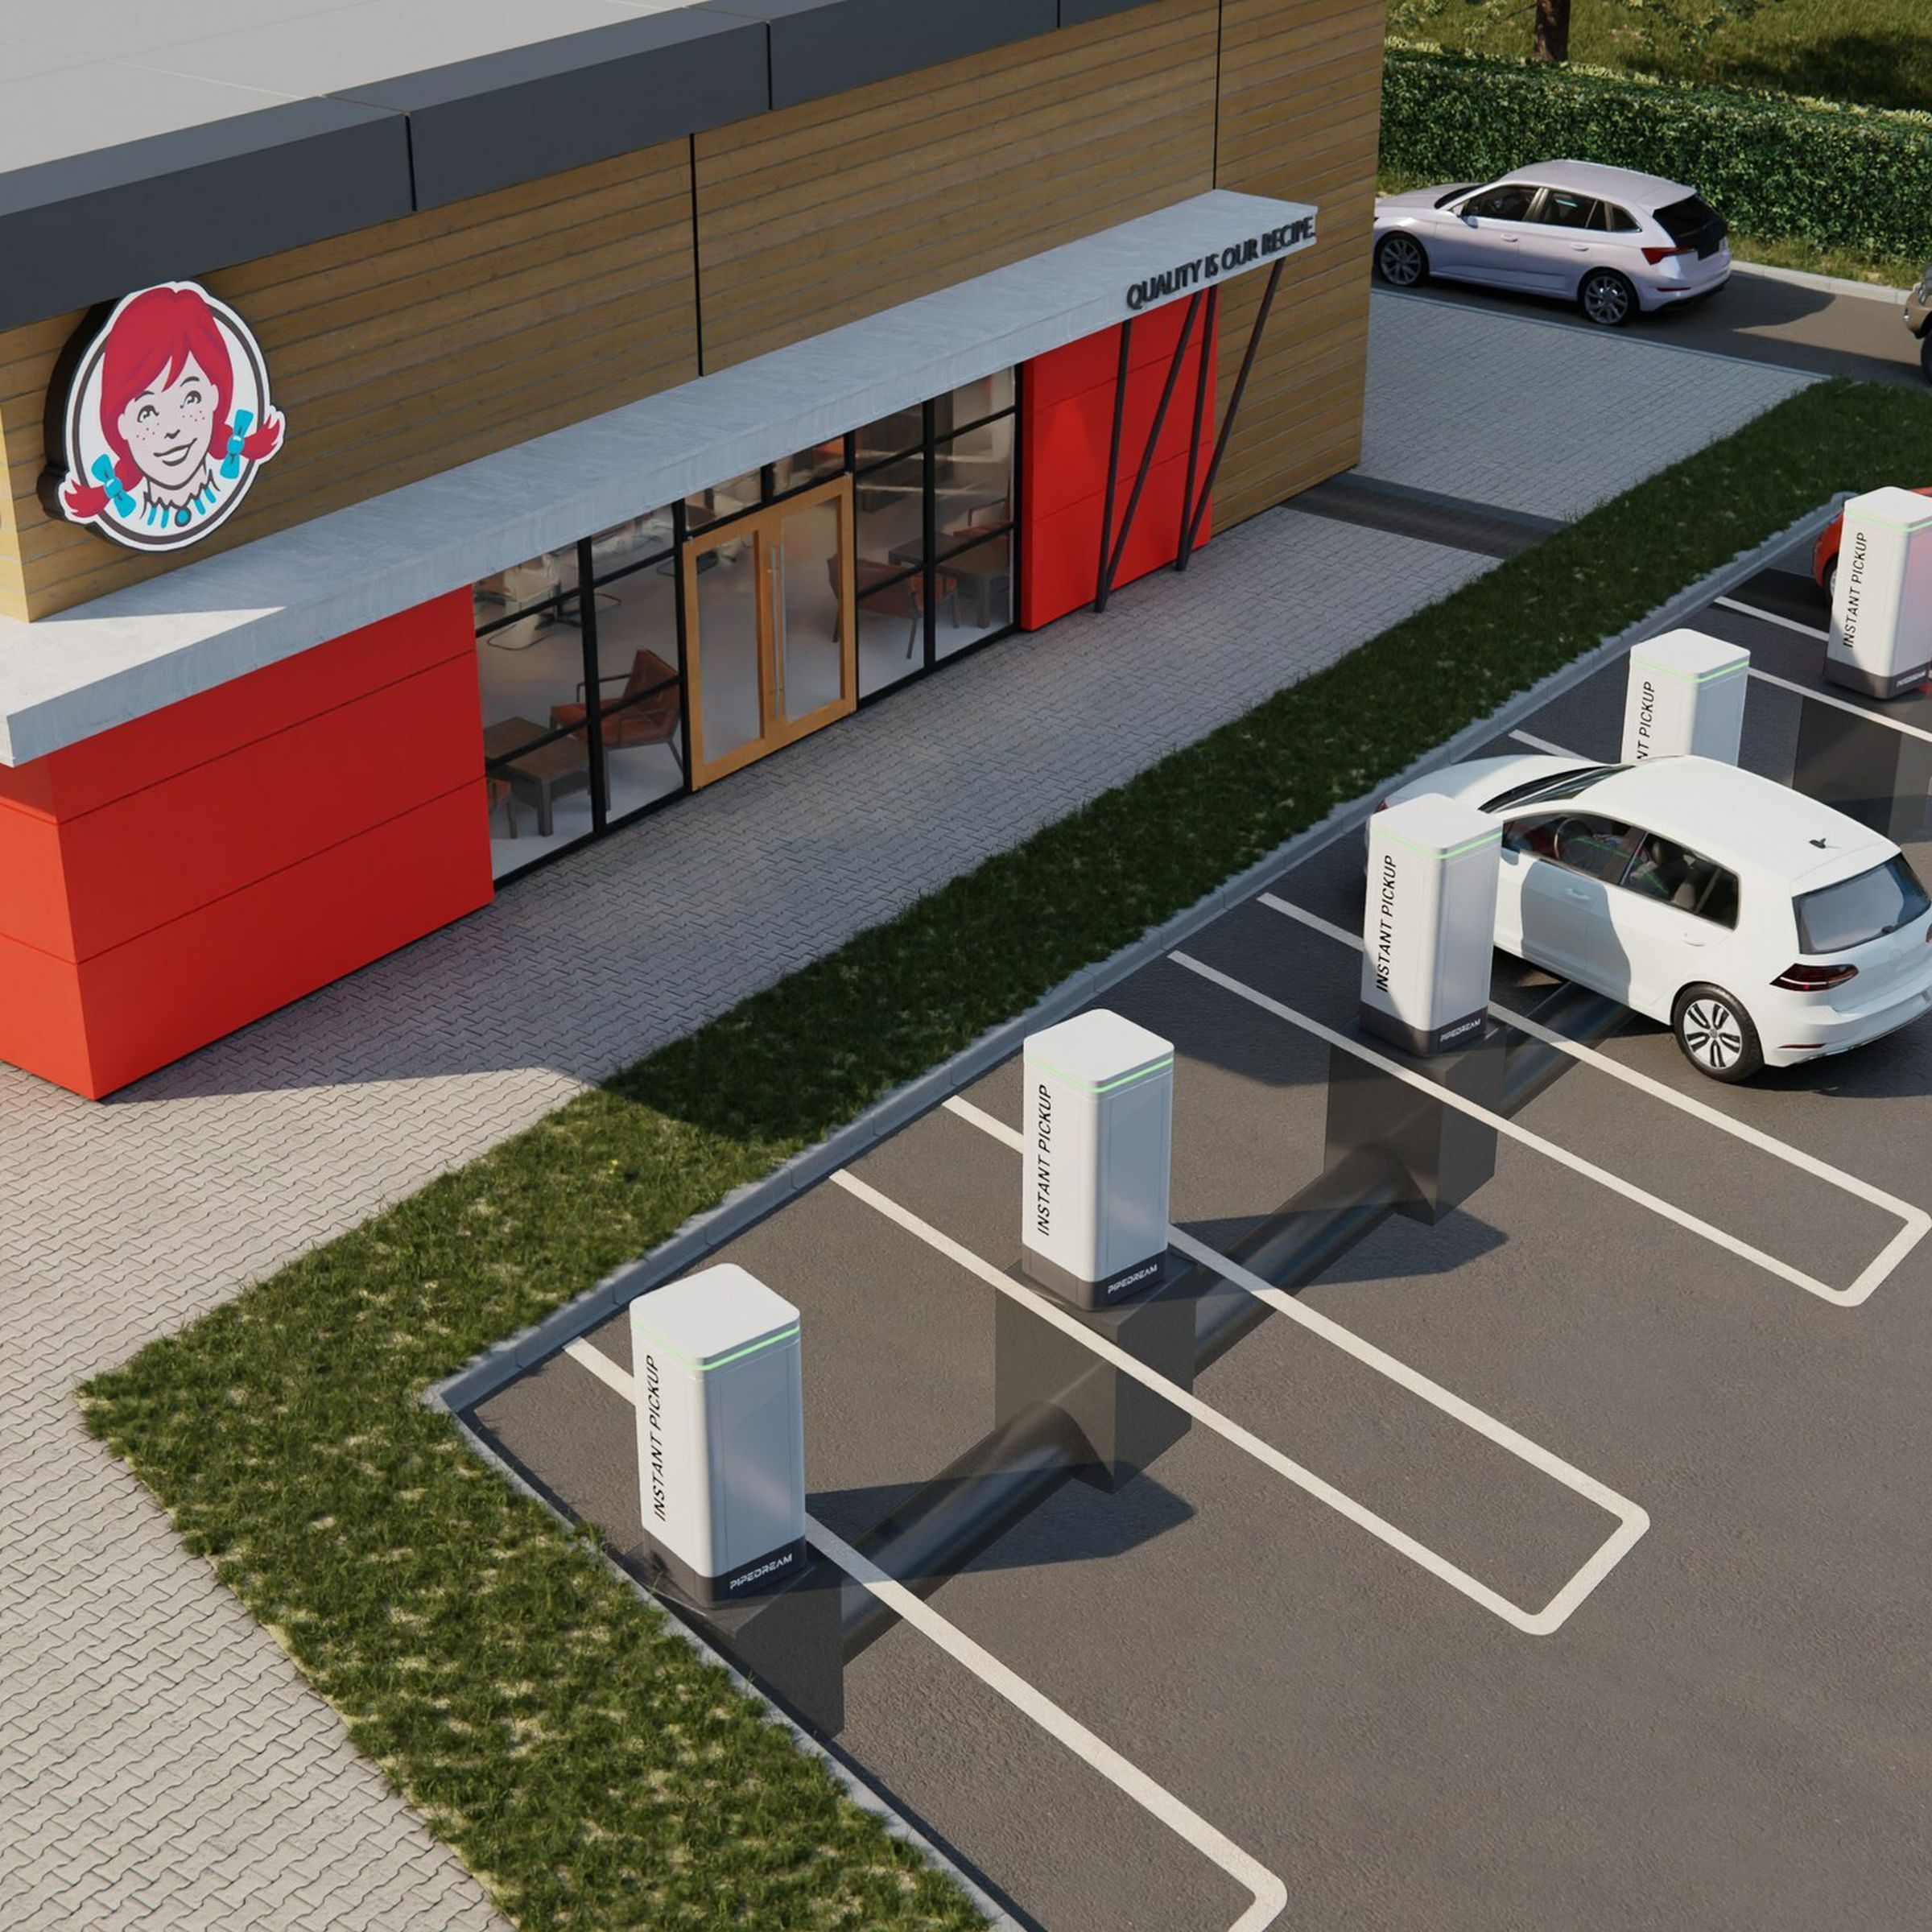 An image showing the underground delivery service at Wendy’s